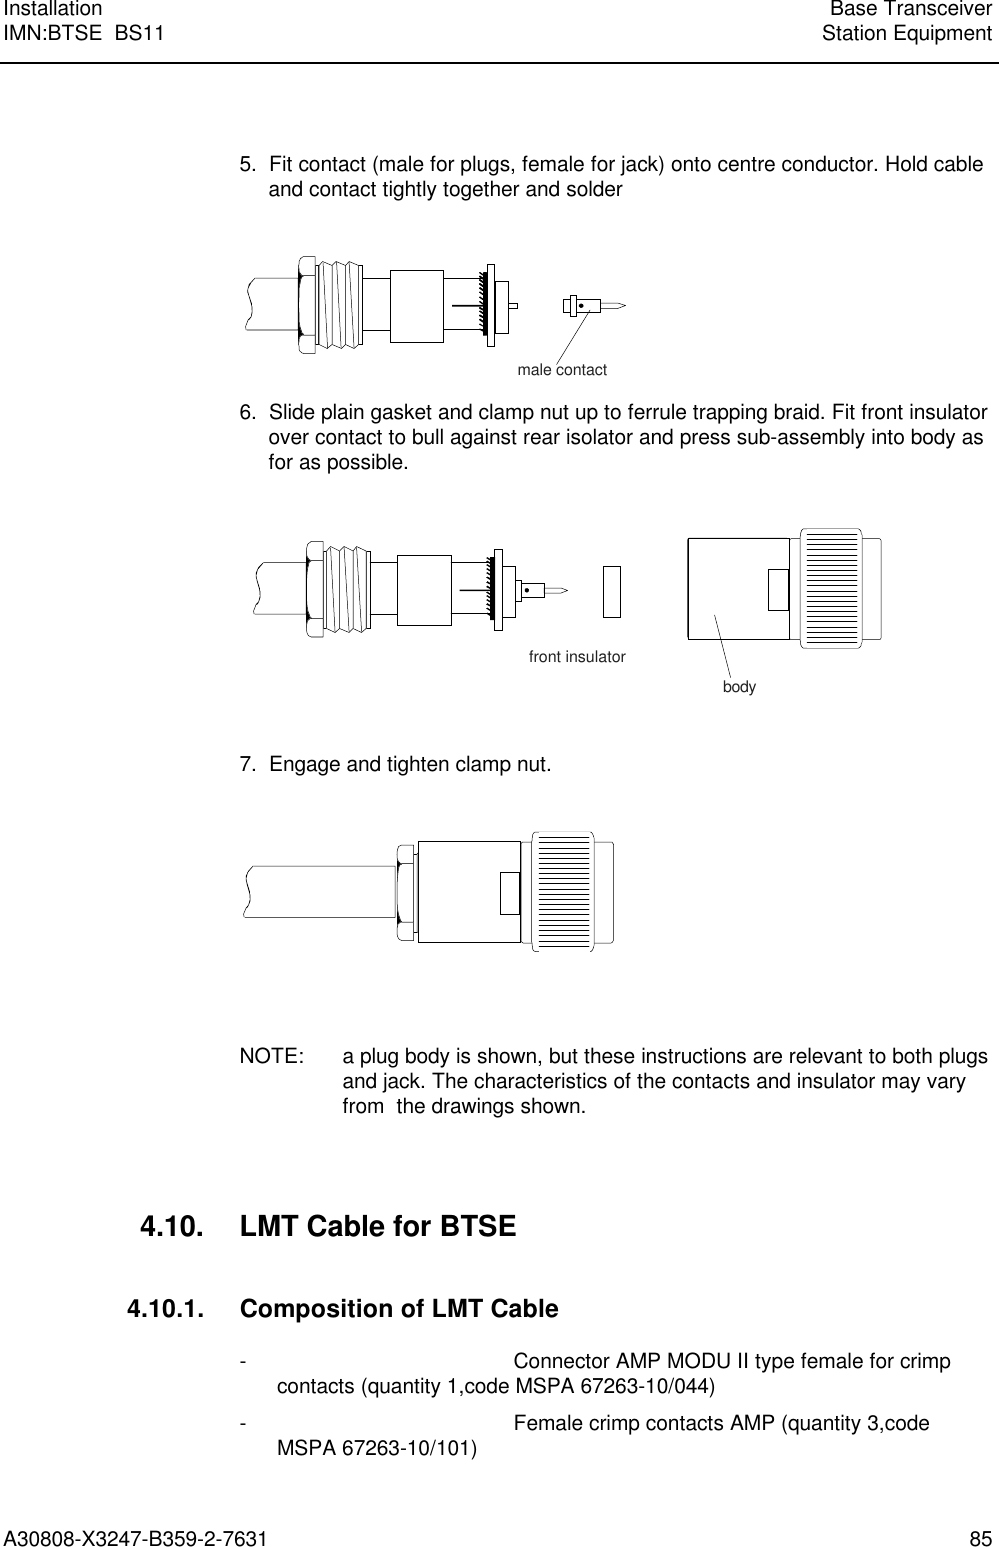 Installation Base TransceiverIMN:BTSE  BS11 Station EquipmentA30808-X3247-B359-2-7631 855.  Fit contact (male for plugs, female for jack) onto centre conductor. Hold cableand contact tightly together and soldermale contact6.  Slide plain gasket and clamp nut up to ferrule trapping braid. Fit front insulatorover contact to bull against rear isolator and press sub-assembly into body asfor as possible.front insulatorbody7.  Engage and tighten clamp nut.NOTE: a plug body is shown, but these instructions are relevant to both plugsand jack. The characteristics of the contacts and insulator may varyfrom  the drawings shown.4.10. LMT Cable for BTSE4.10.1. Composition of LMT Cable- Connector AMP MODU II type female for crimpcontacts (quantity 1,code MSPA 67263-10/044)- Female crimp contacts AMP (quantity 3,codeMSPA 67263-10/101)